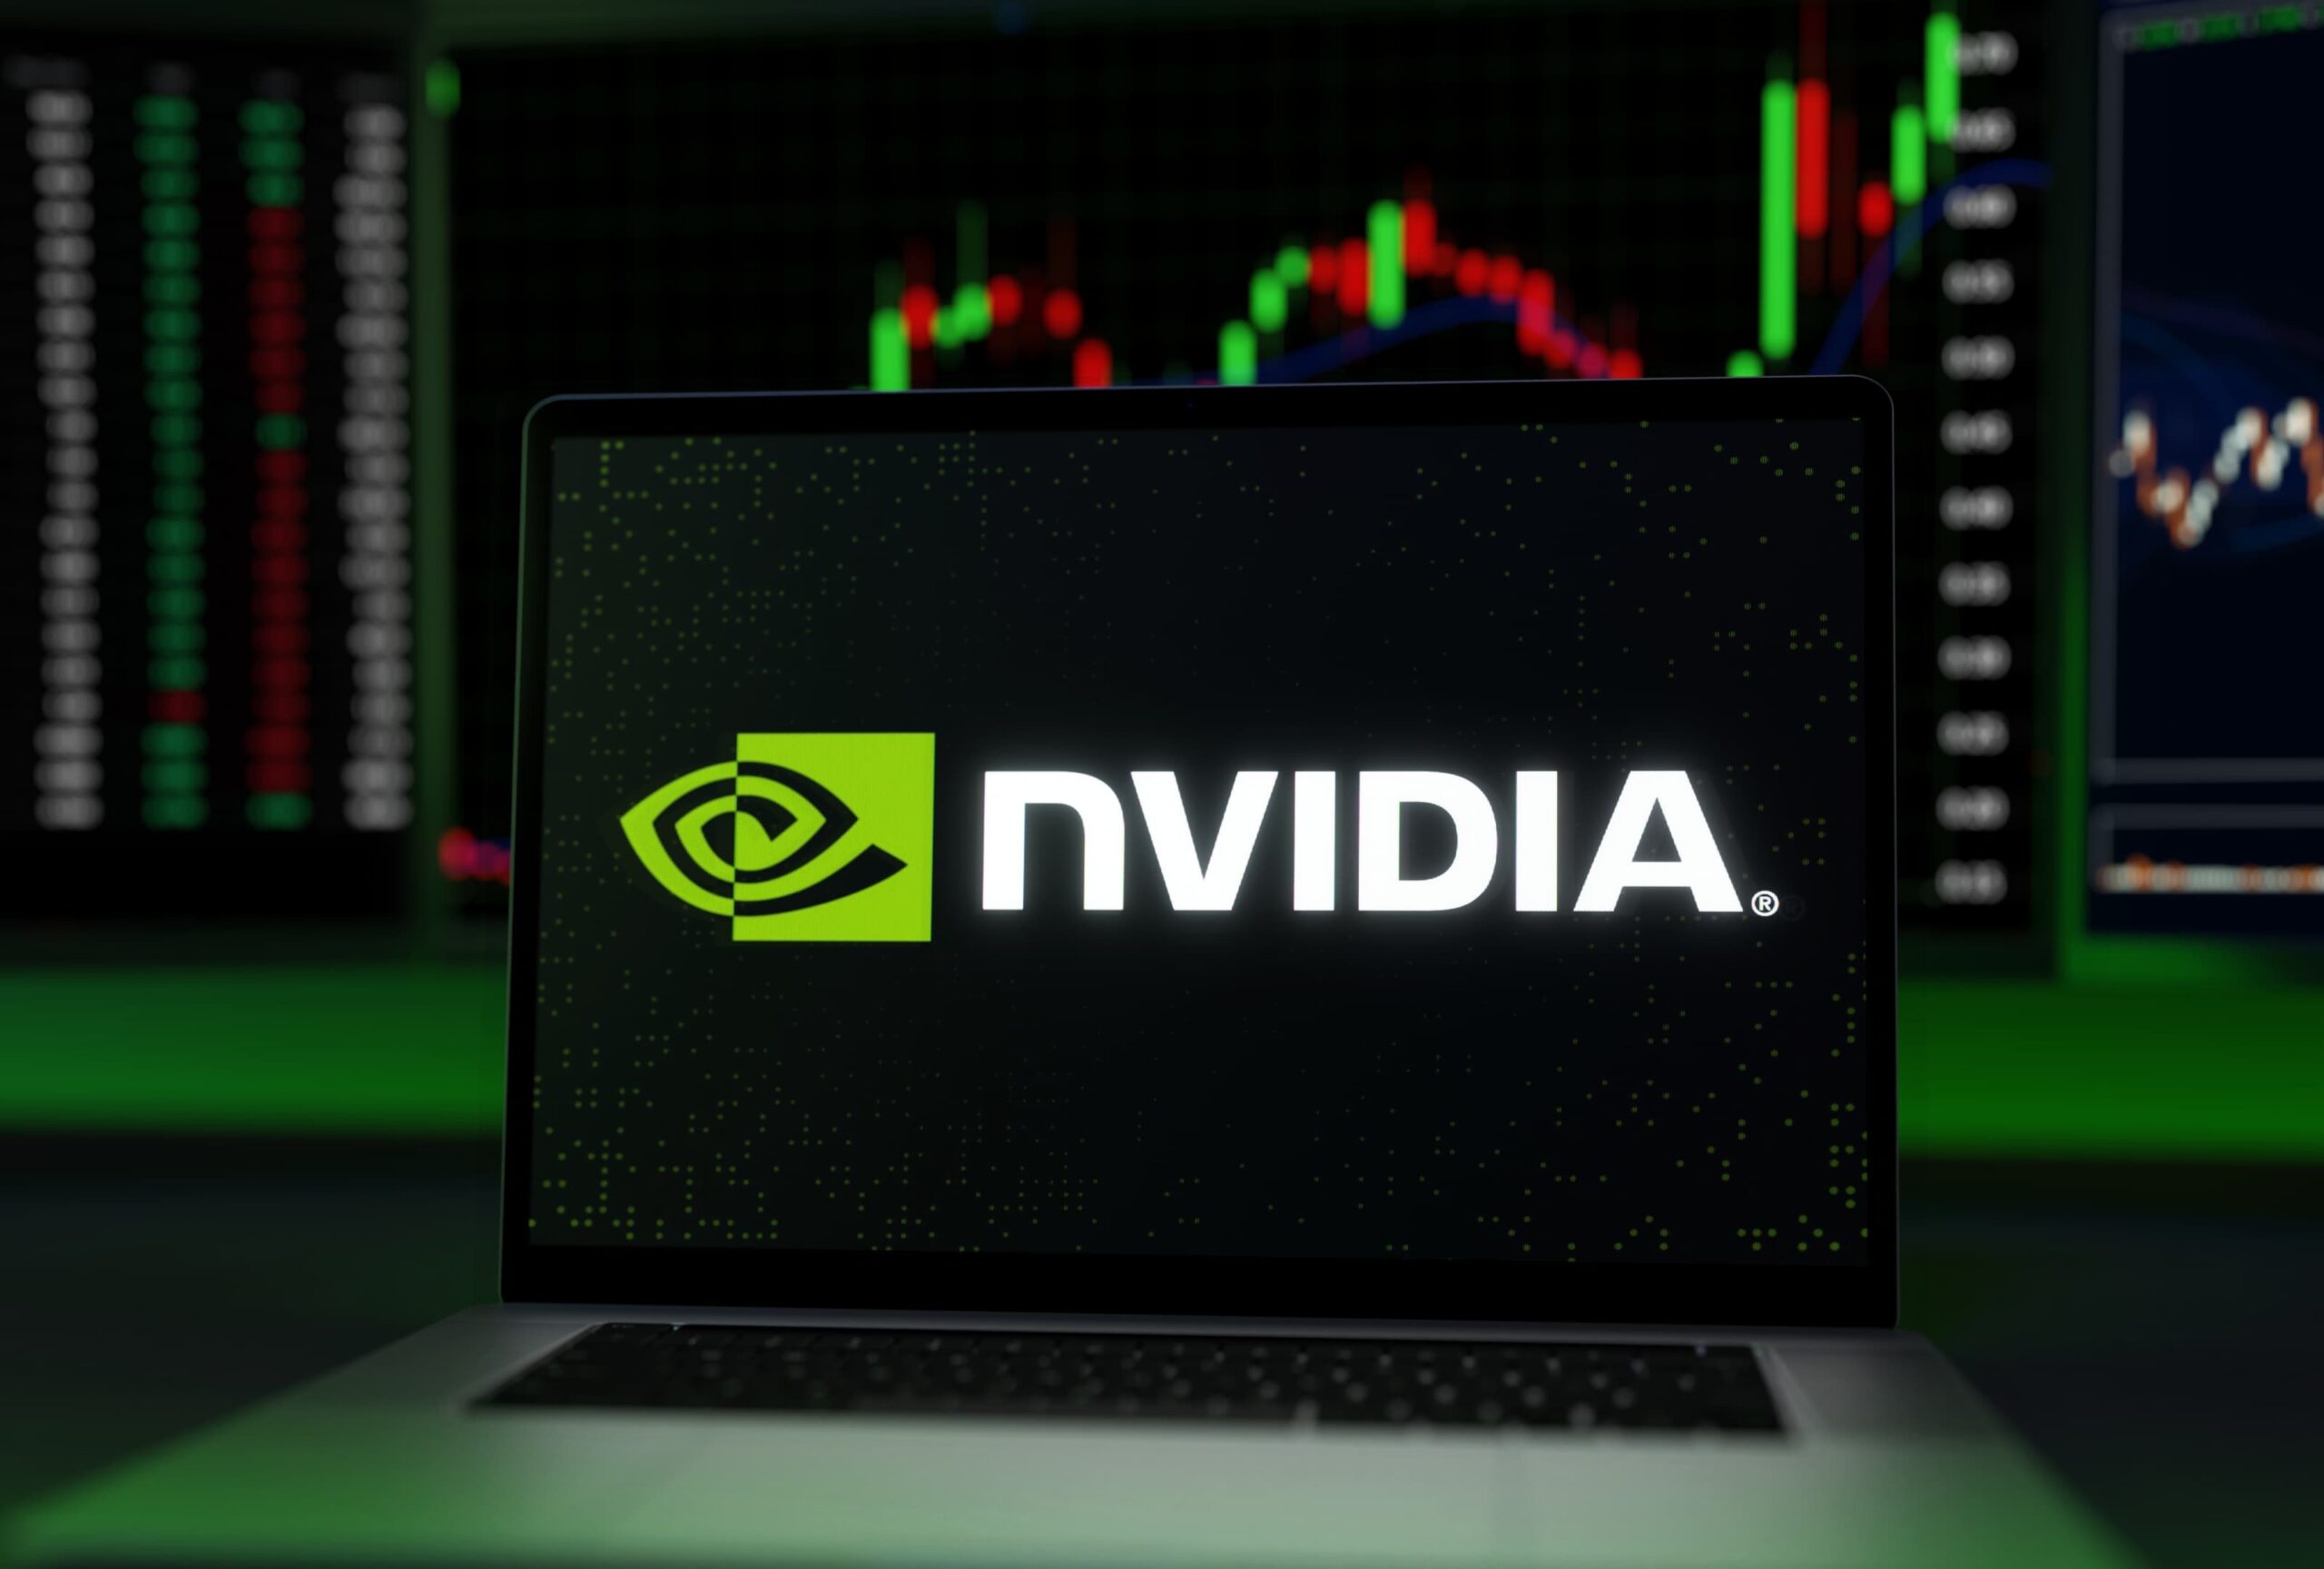 Has Nvidia stock price peaked? Experts weigh in